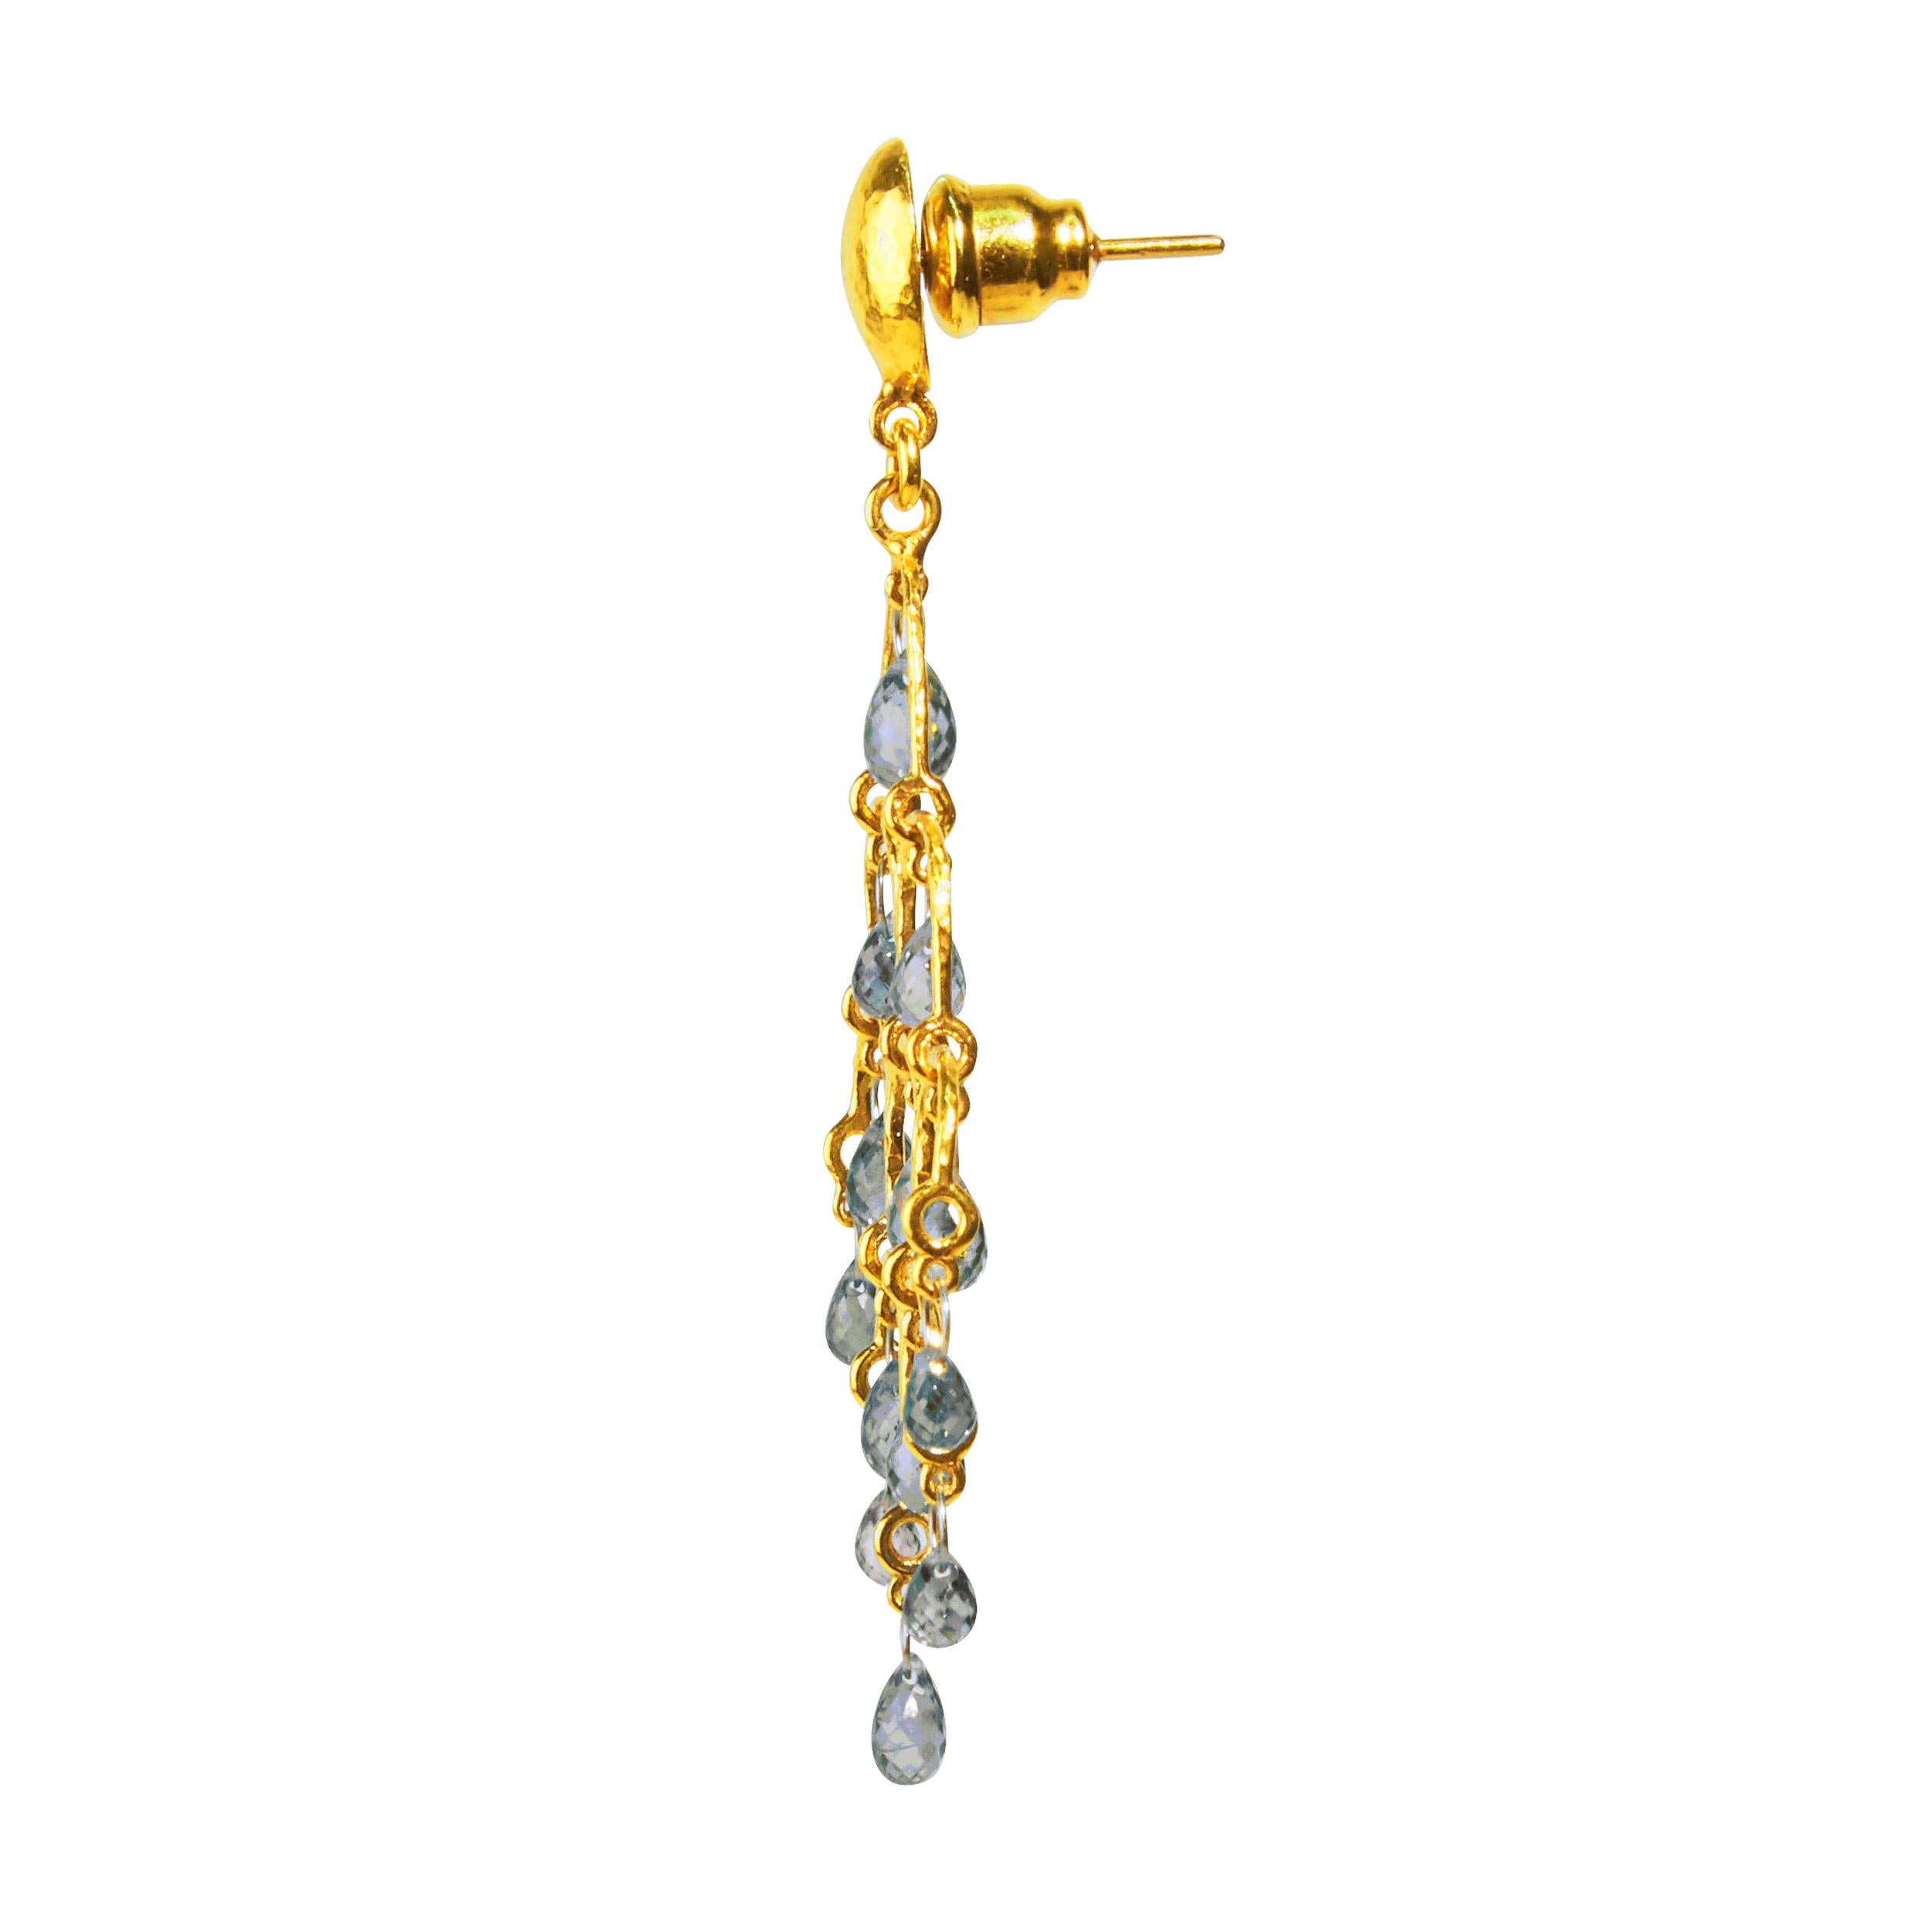 GURHAN 22 Karat hammered yellow gold Delicate Dew chandelier earrings featuring faceted, Blue Fancy Sapphire briolettes, 8.25cts. 2.3” total length with 9x7mm oval lentil top in 24K hammered gold and 18K Gold post and Vermeil backing.